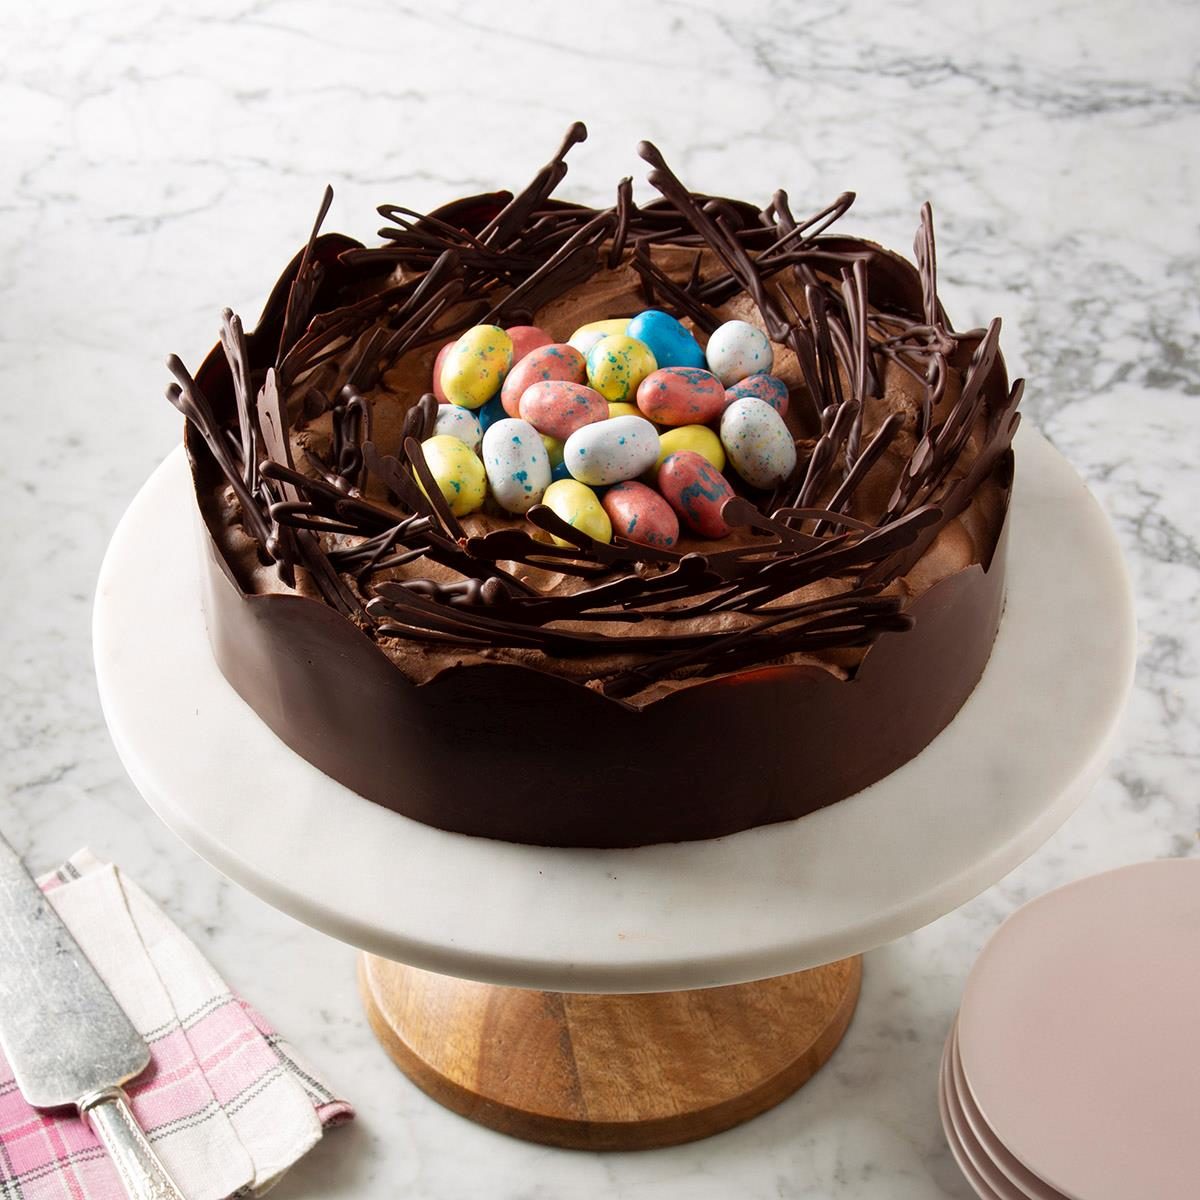 35 Fabulous Desserts That One-Up the Easter Bunny